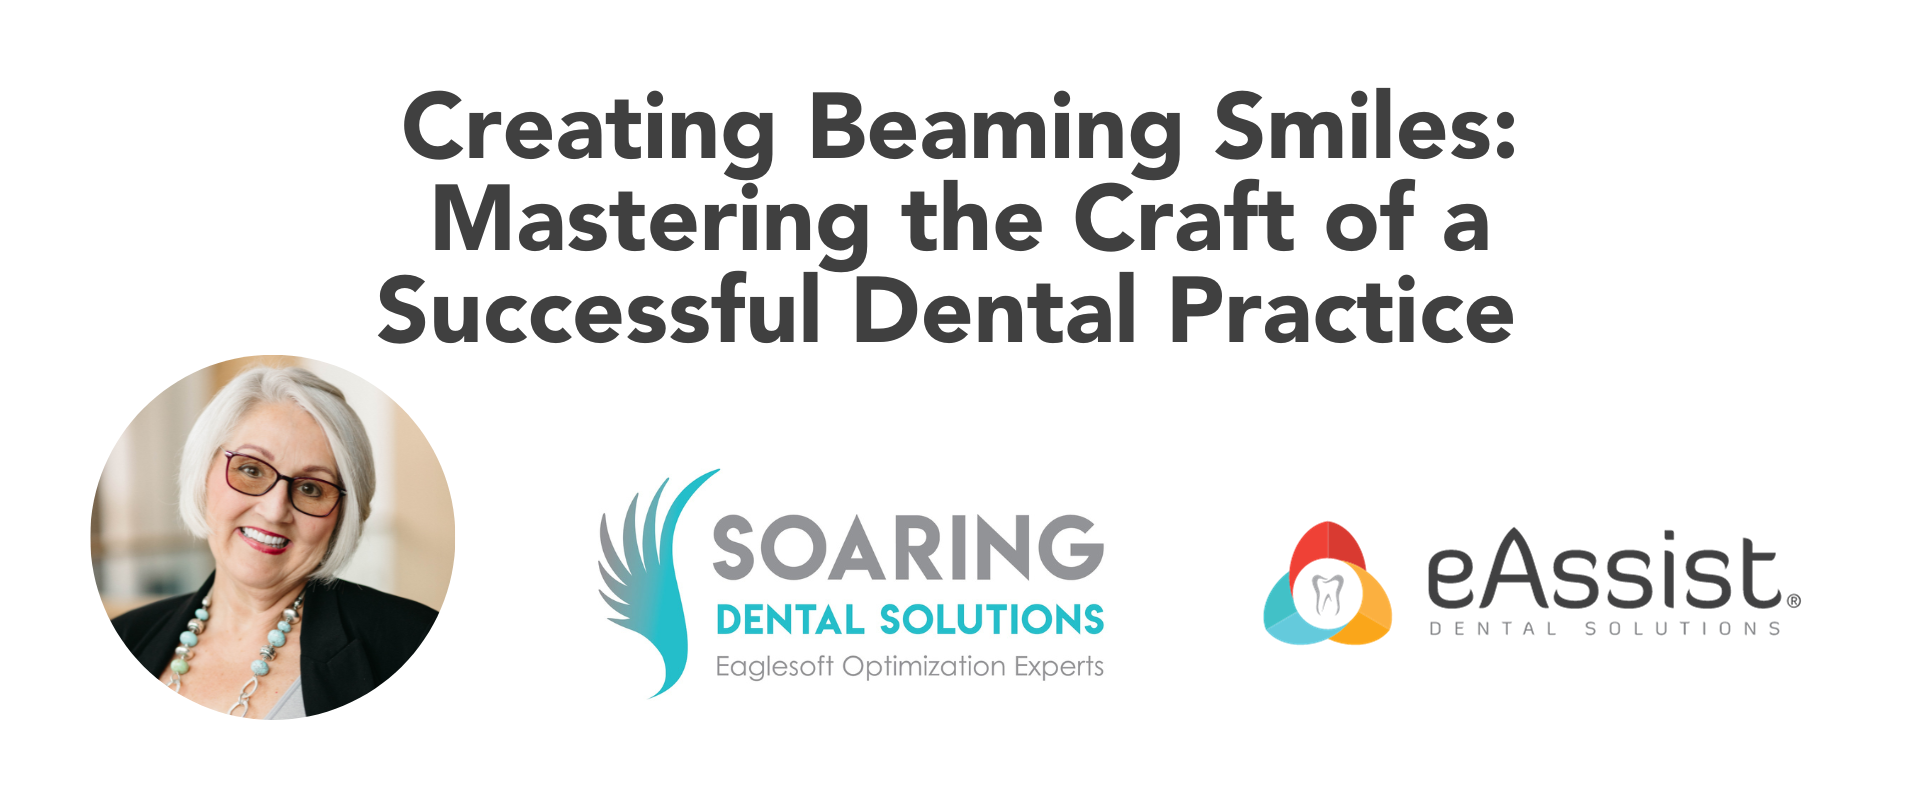 Creating Beaming Smiles: Mastering the Craft of a Successful Dental Practice